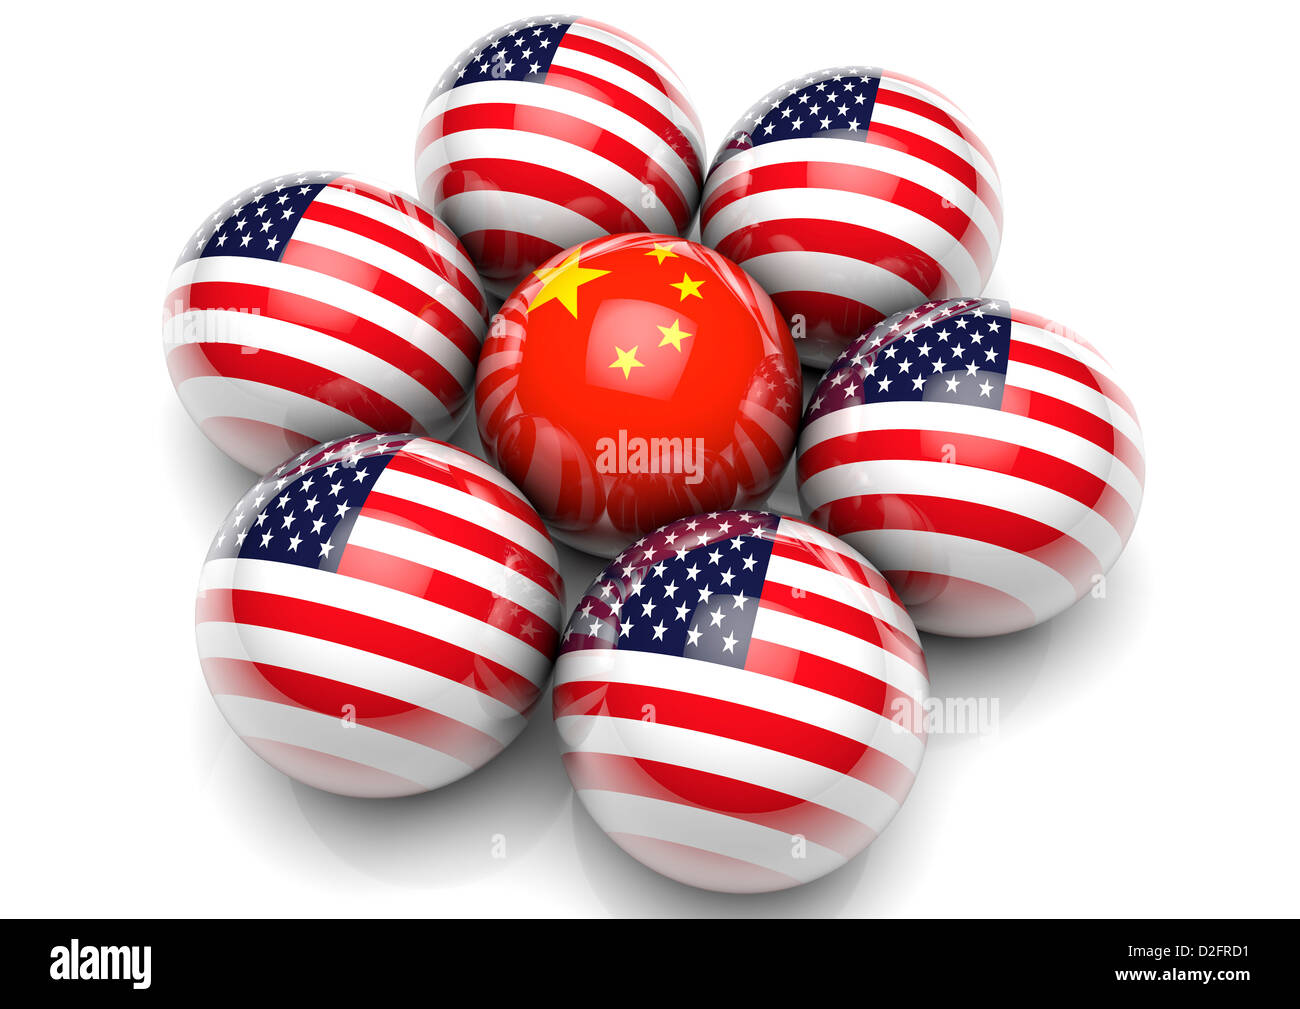 Sphere with the flag of China surrounded by spheres with the USA Stars and Stripes Flag - international relations concept Stock Photo